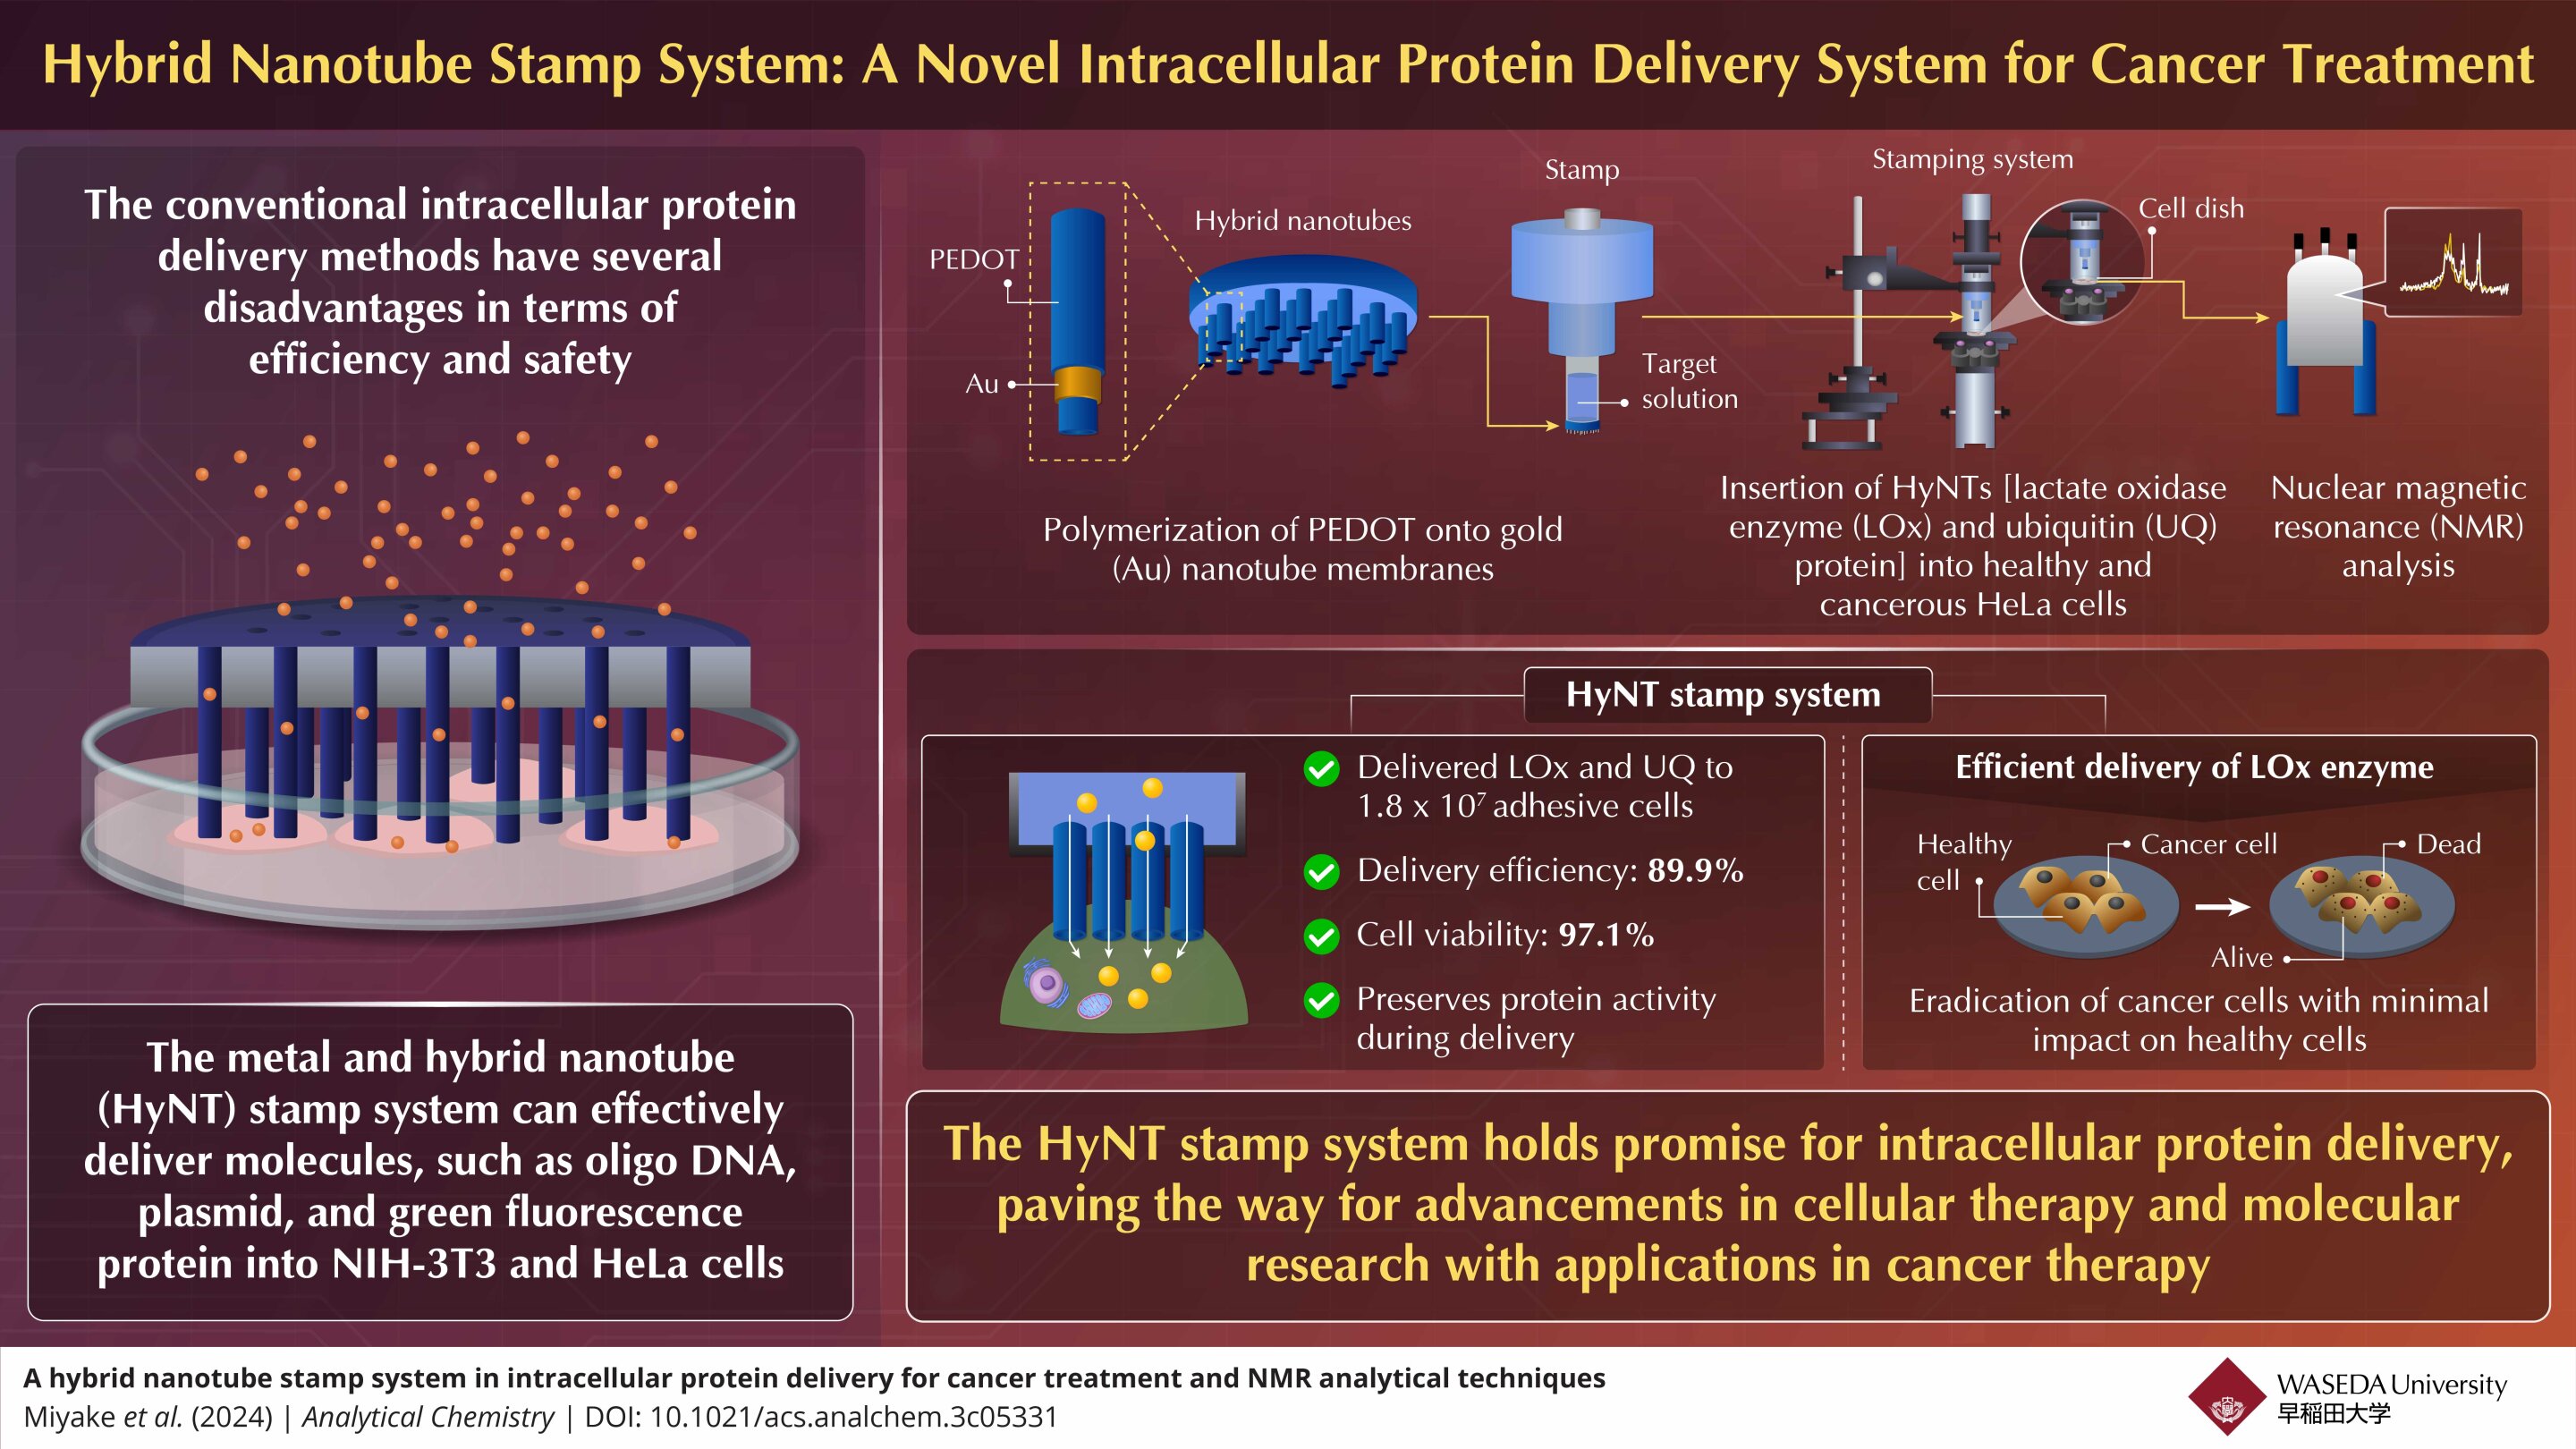 Using hybrid nanotubes to enhance cancer treatment with intracellular protein delivery